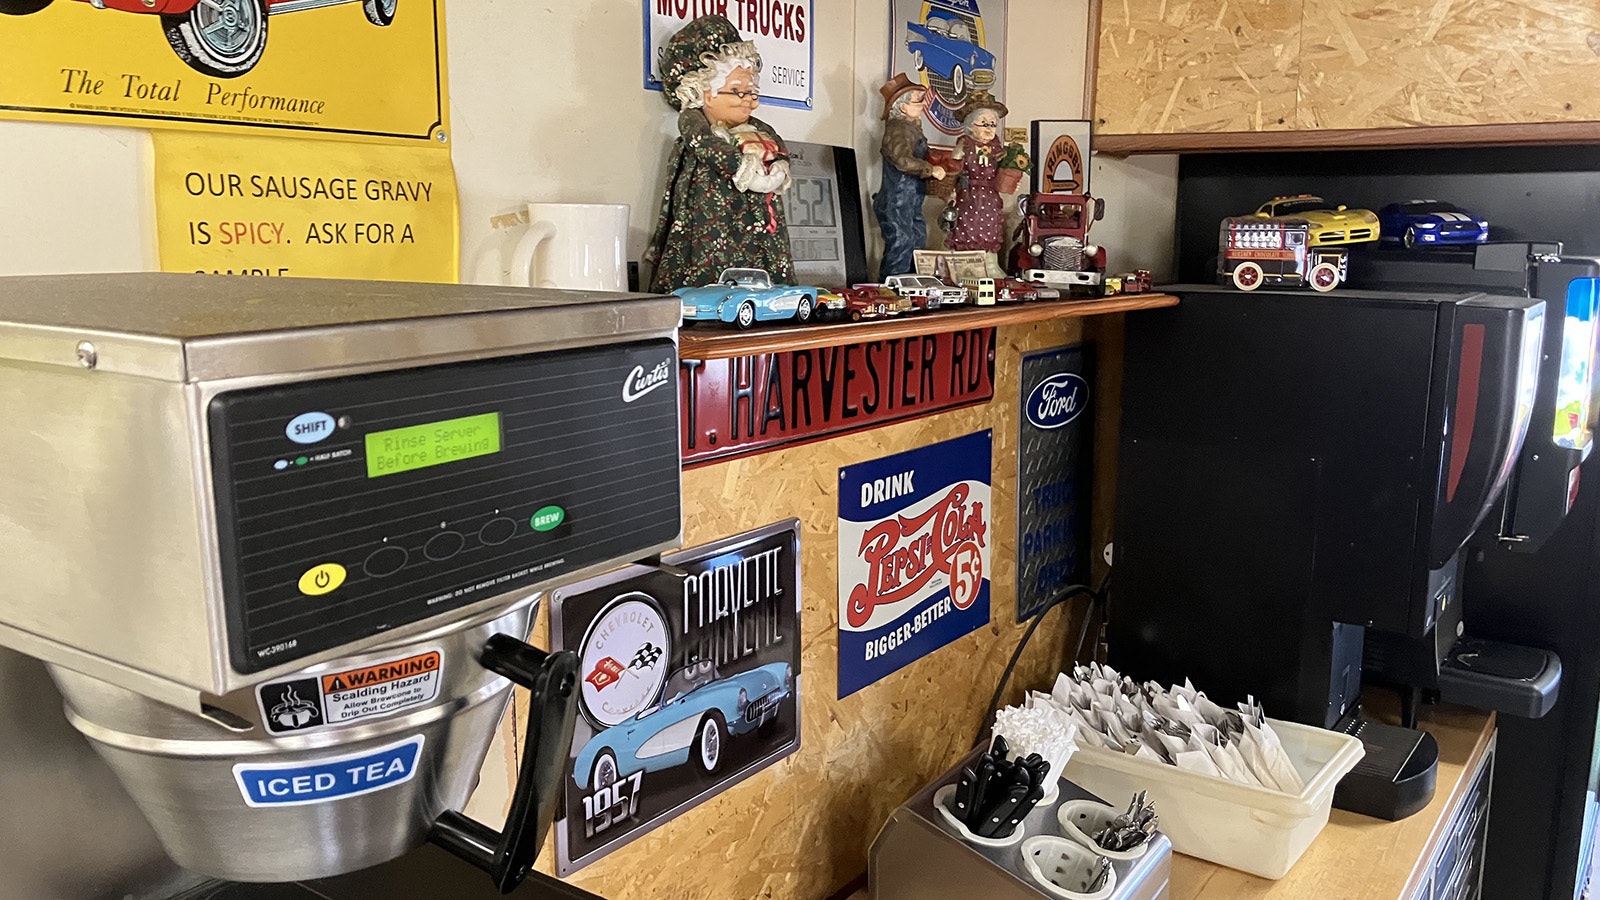 Classic car, truck, and soft drink signs fill the wall between the soft drink and coffee machines at the diner.